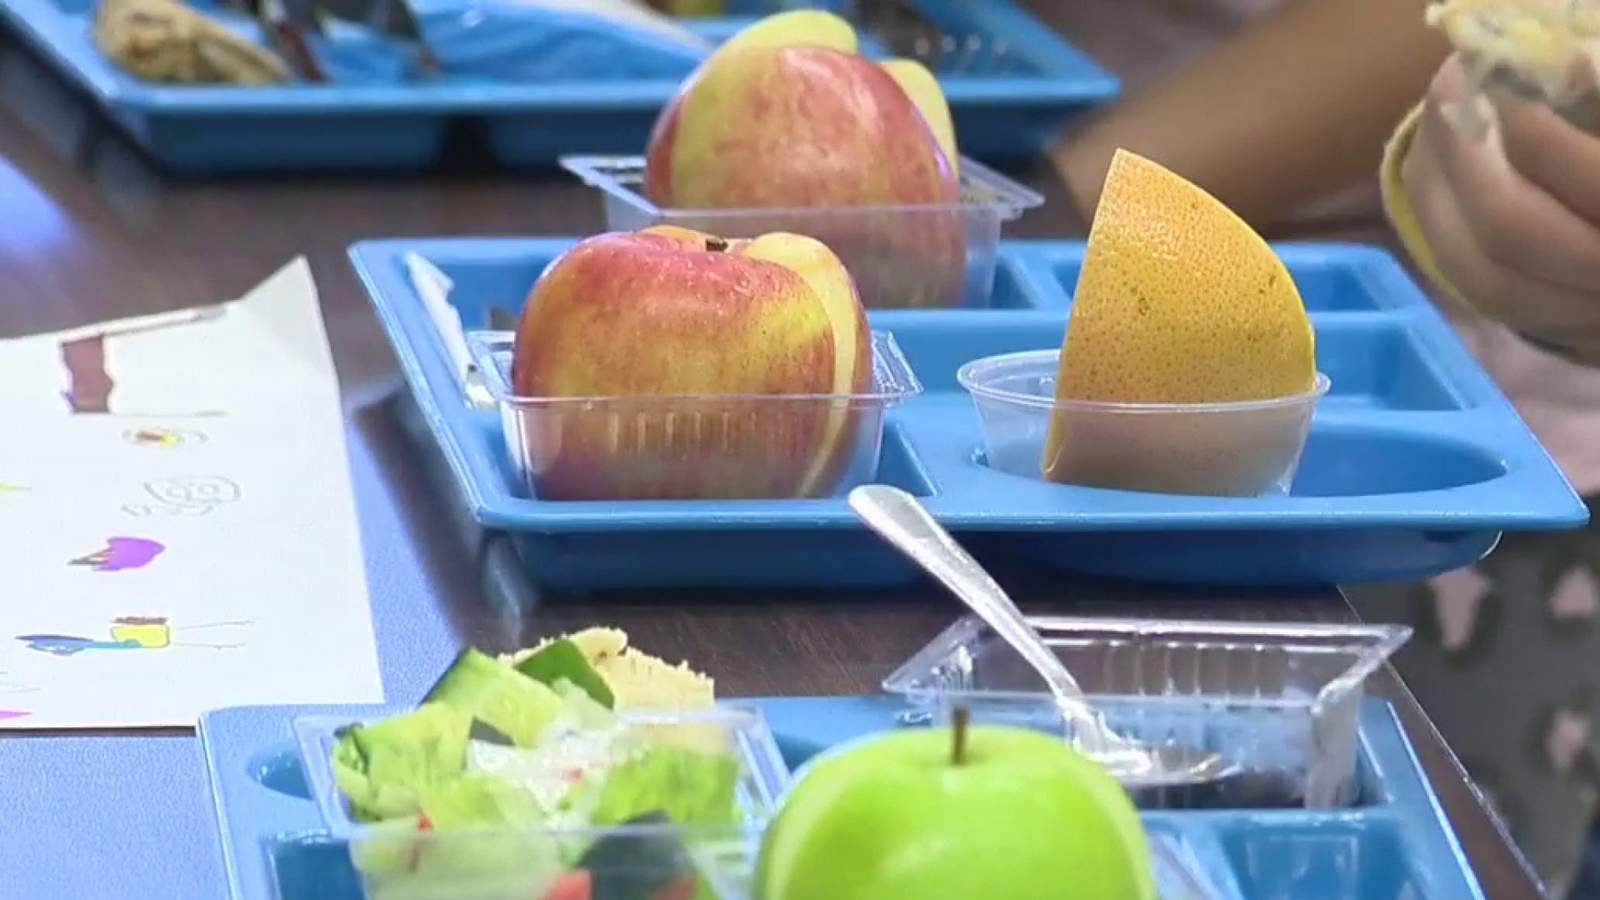 USDA proposes changes to school lunch program requirements